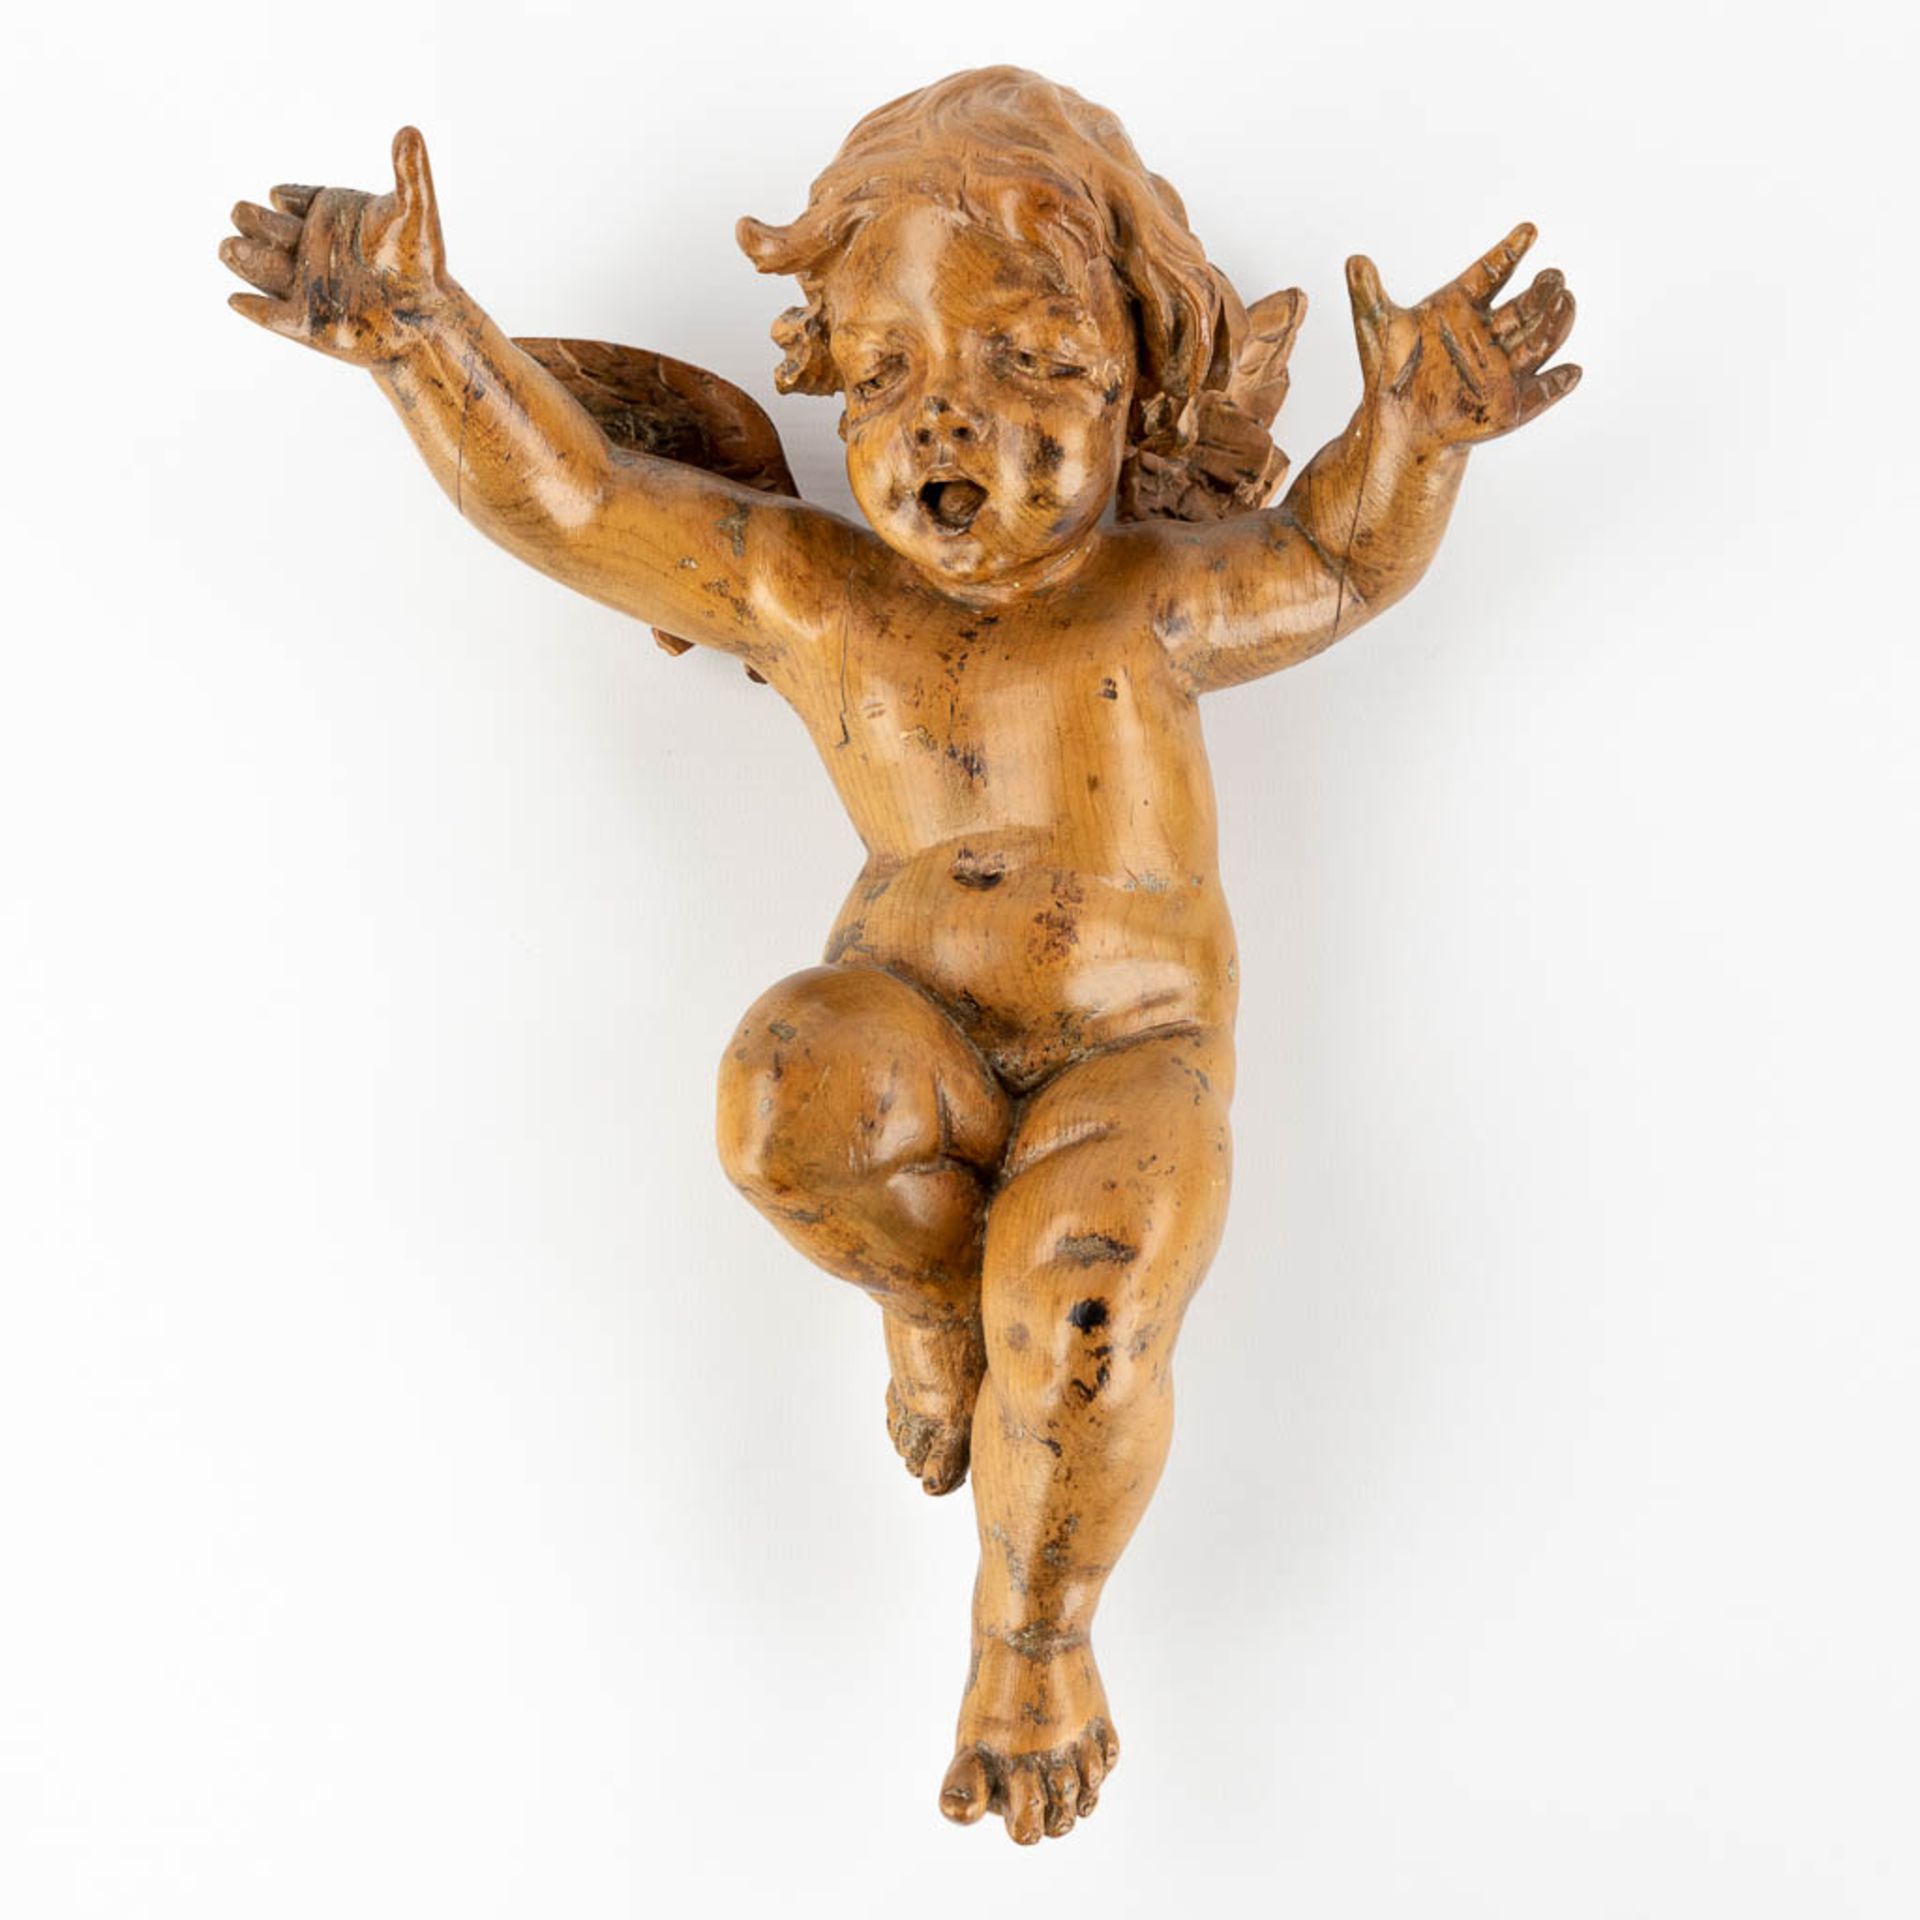 A pair of wood-sculptured putti, basswood, 18th C. (W:22 x H:30 cm) - Image 3 of 14